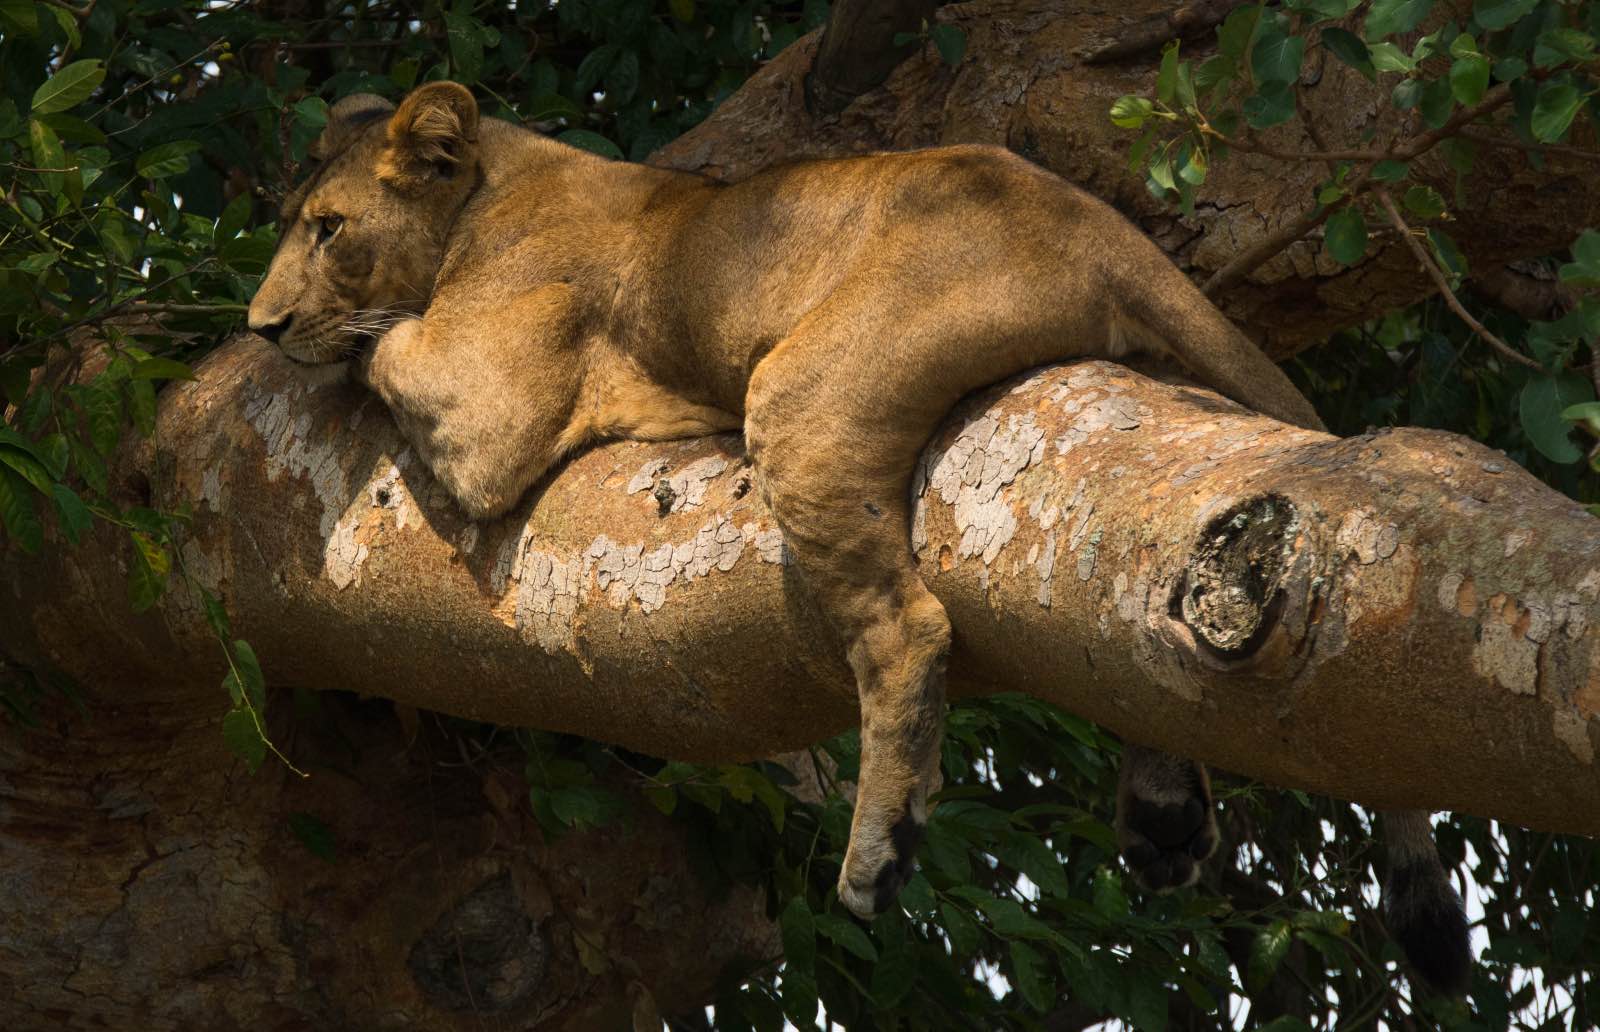 Lions sleeping in a sycamore fig tree in Queen Elizabeth National Park where they famously climb trees